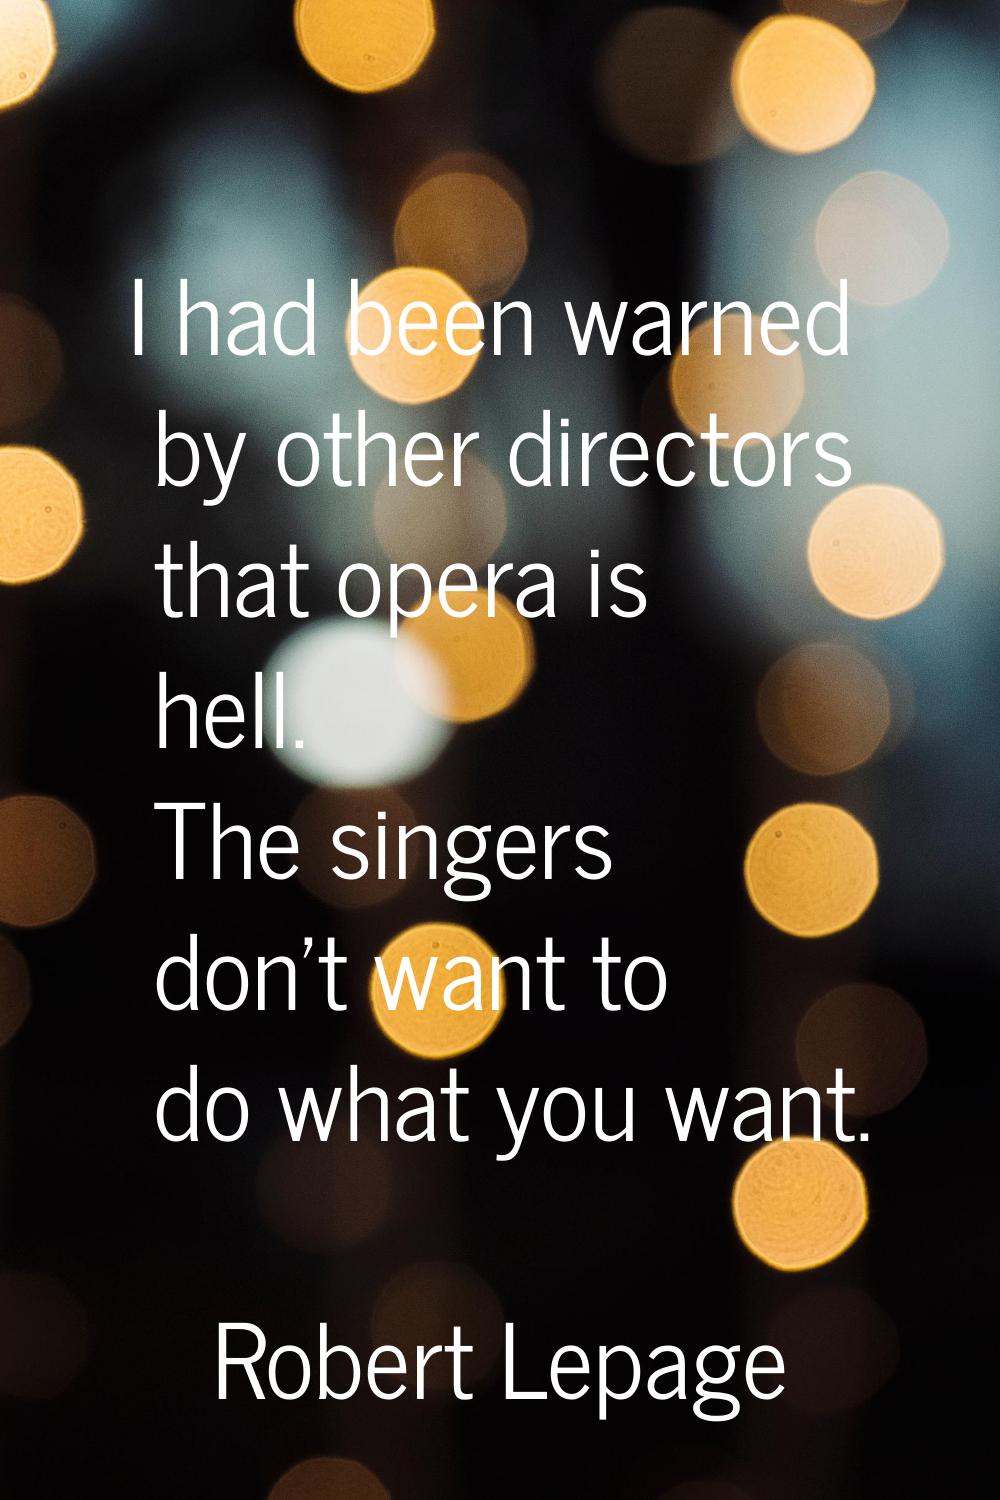 I had been warned by other directors that opera is hell. The singers don't want to do what you want